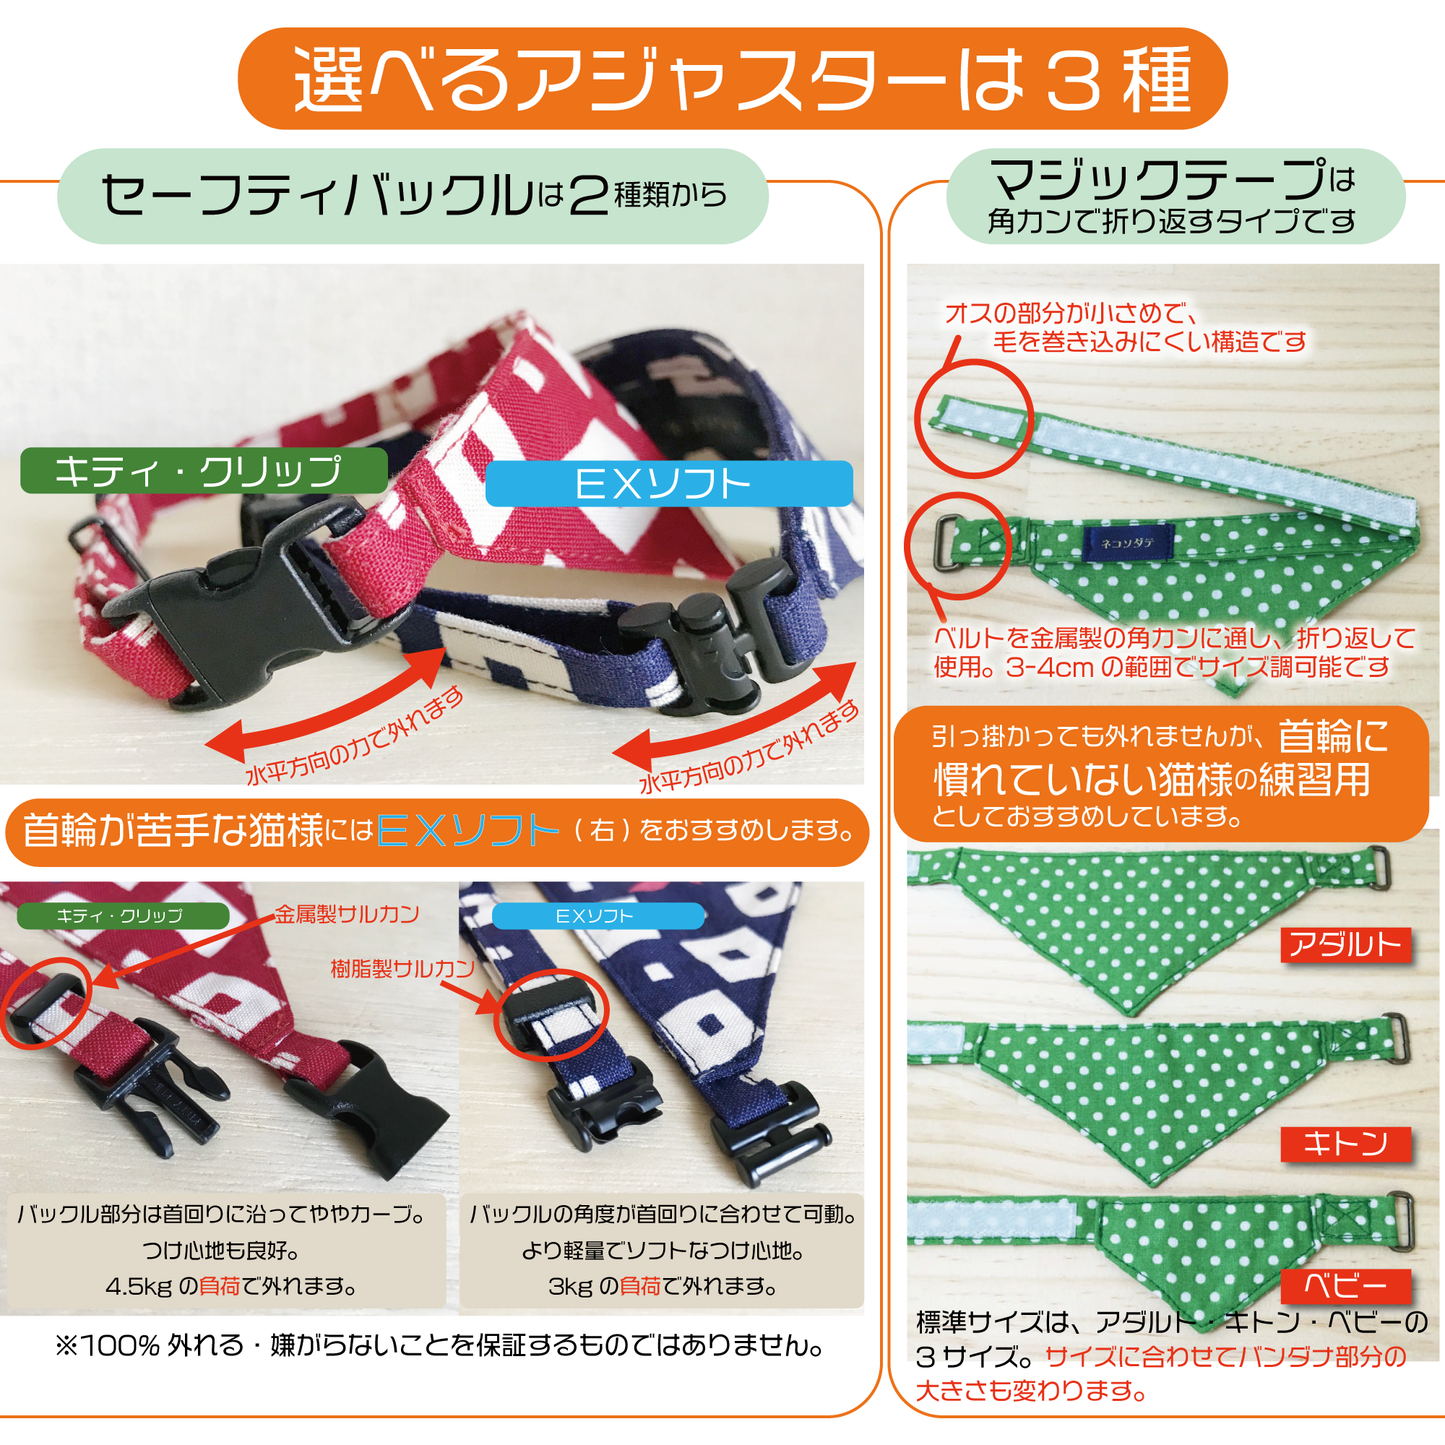 [Feathered pattern blue green] Serious collar, conspicuous bandana style / selectable adjuster cat collar